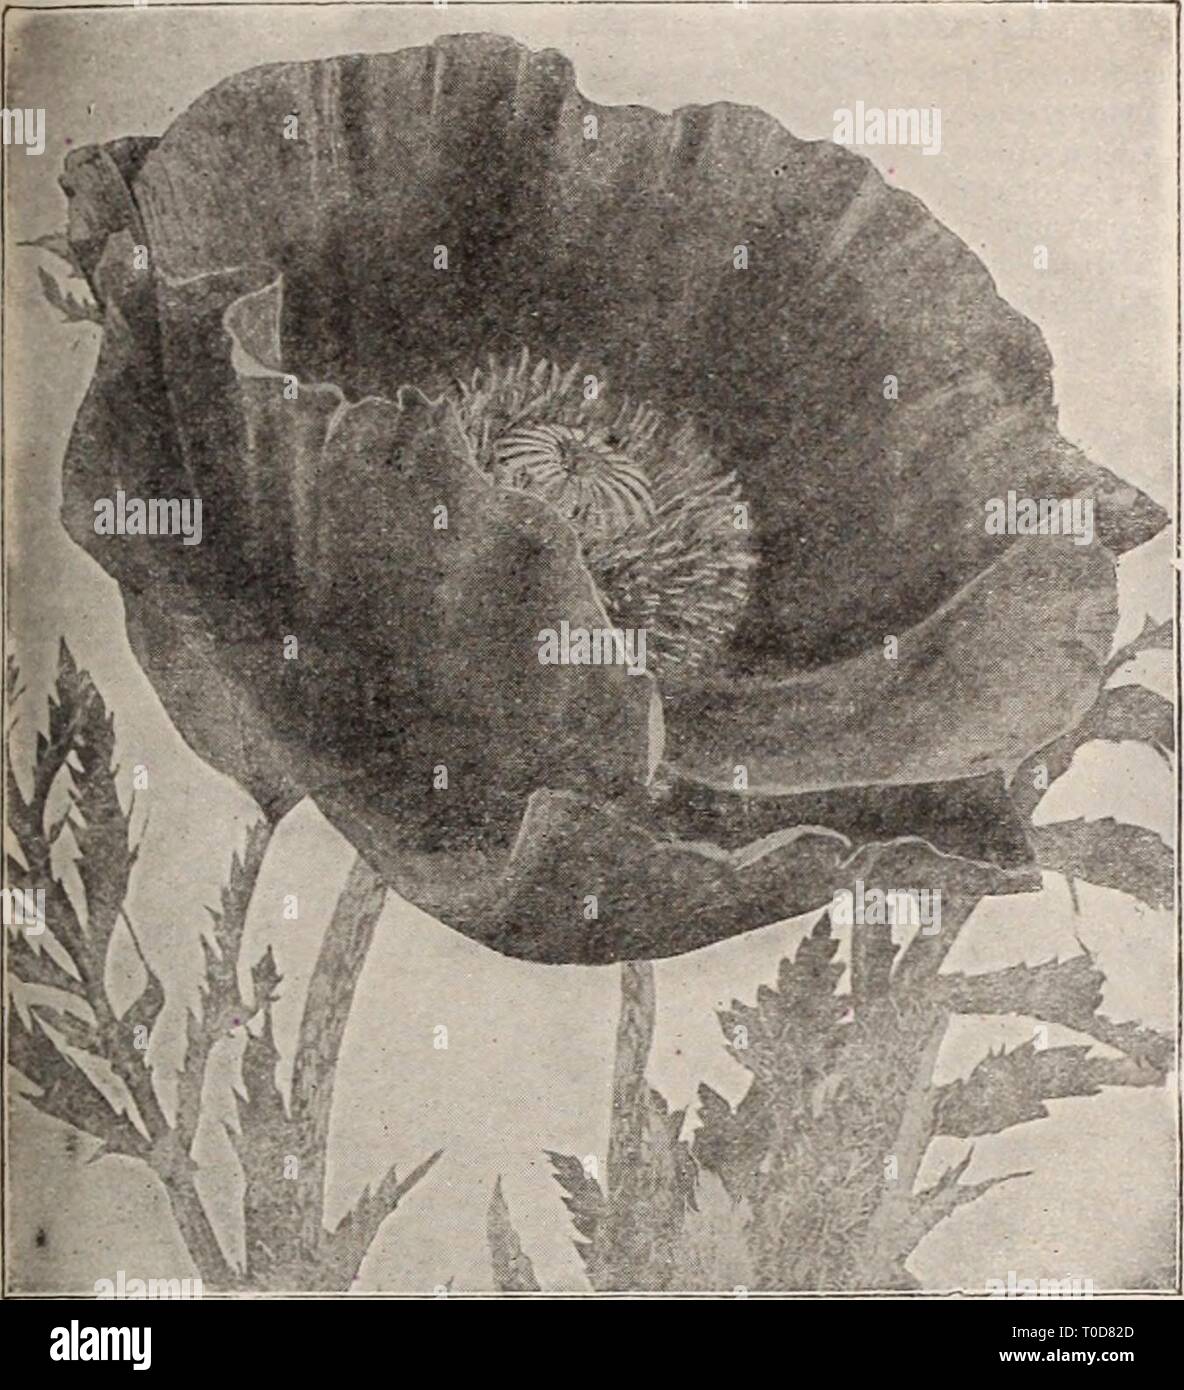 Dreer's garden book  Henry Dreer's garden book / Henry A. Dreer. dreersgardenbook1931dree Year:   x HARDY PERENNIAL PIANTS / 187    Papaver Orientalis (Oriental Poppy) Pachysandra (Japanese Spurge) Terminalis. A trailing plant, 6 to 8 inches high, forming broad mats of bright, glossy green foliage and small spikes of flowers during May and June; invaluable as a cover plant either in sun or shade. 25 cts. each; $2.00 per doz.; $15.00 per 100; $120.00 per 1000. Hardy Garden Pinks Dianthus Plumarius (Scotch Pinks) Old favorites, bearing their sweet, clove-scented double flowers in the greatest pr Stock Photo